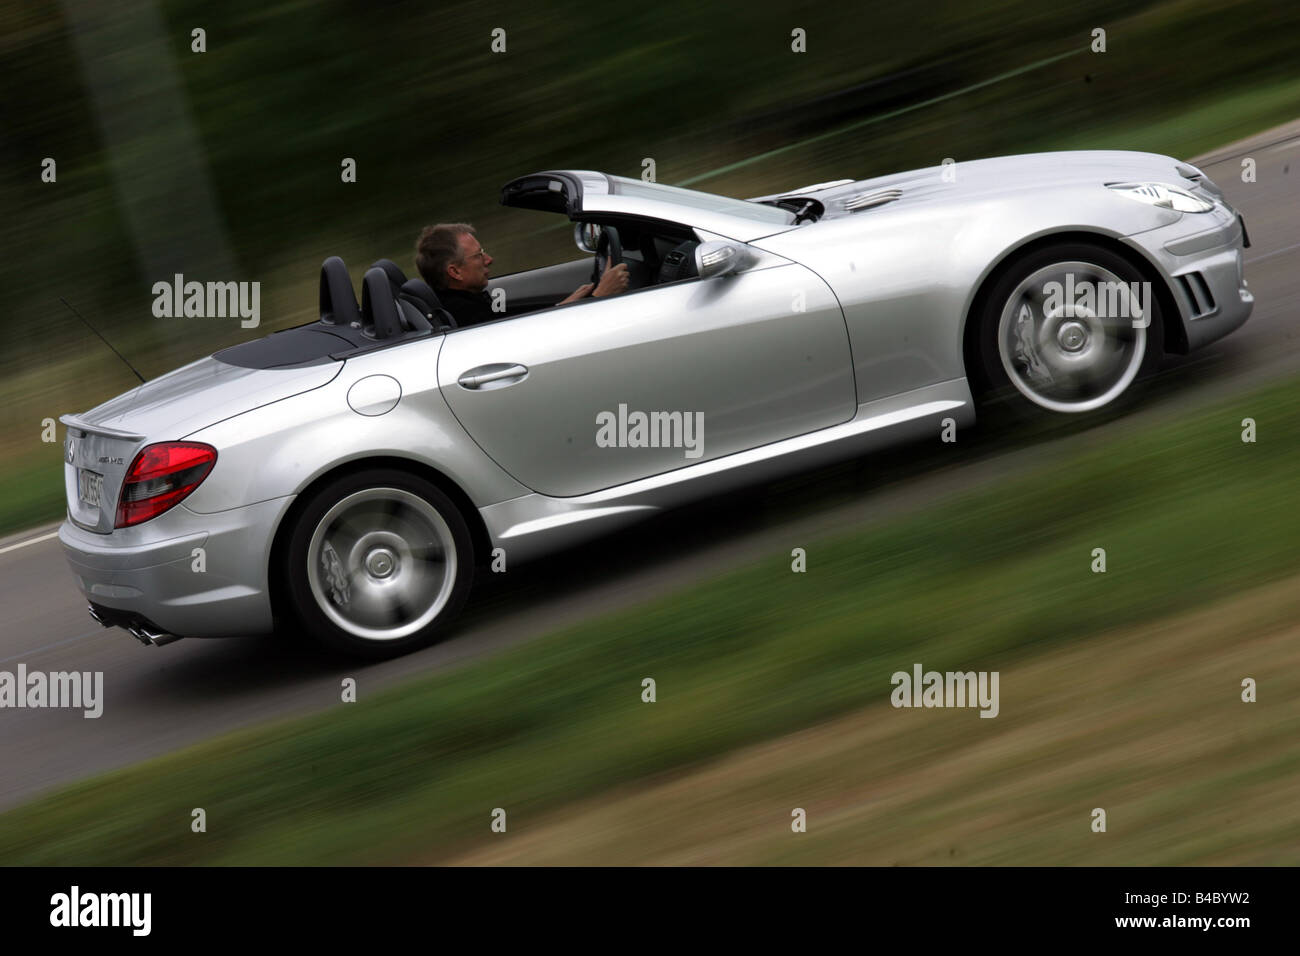 Car, Mercedes SLK 55 AMG, Convertible, model year 2004-, silver, open top, driving, side view, country road, photographer: Uli J Stock Photo